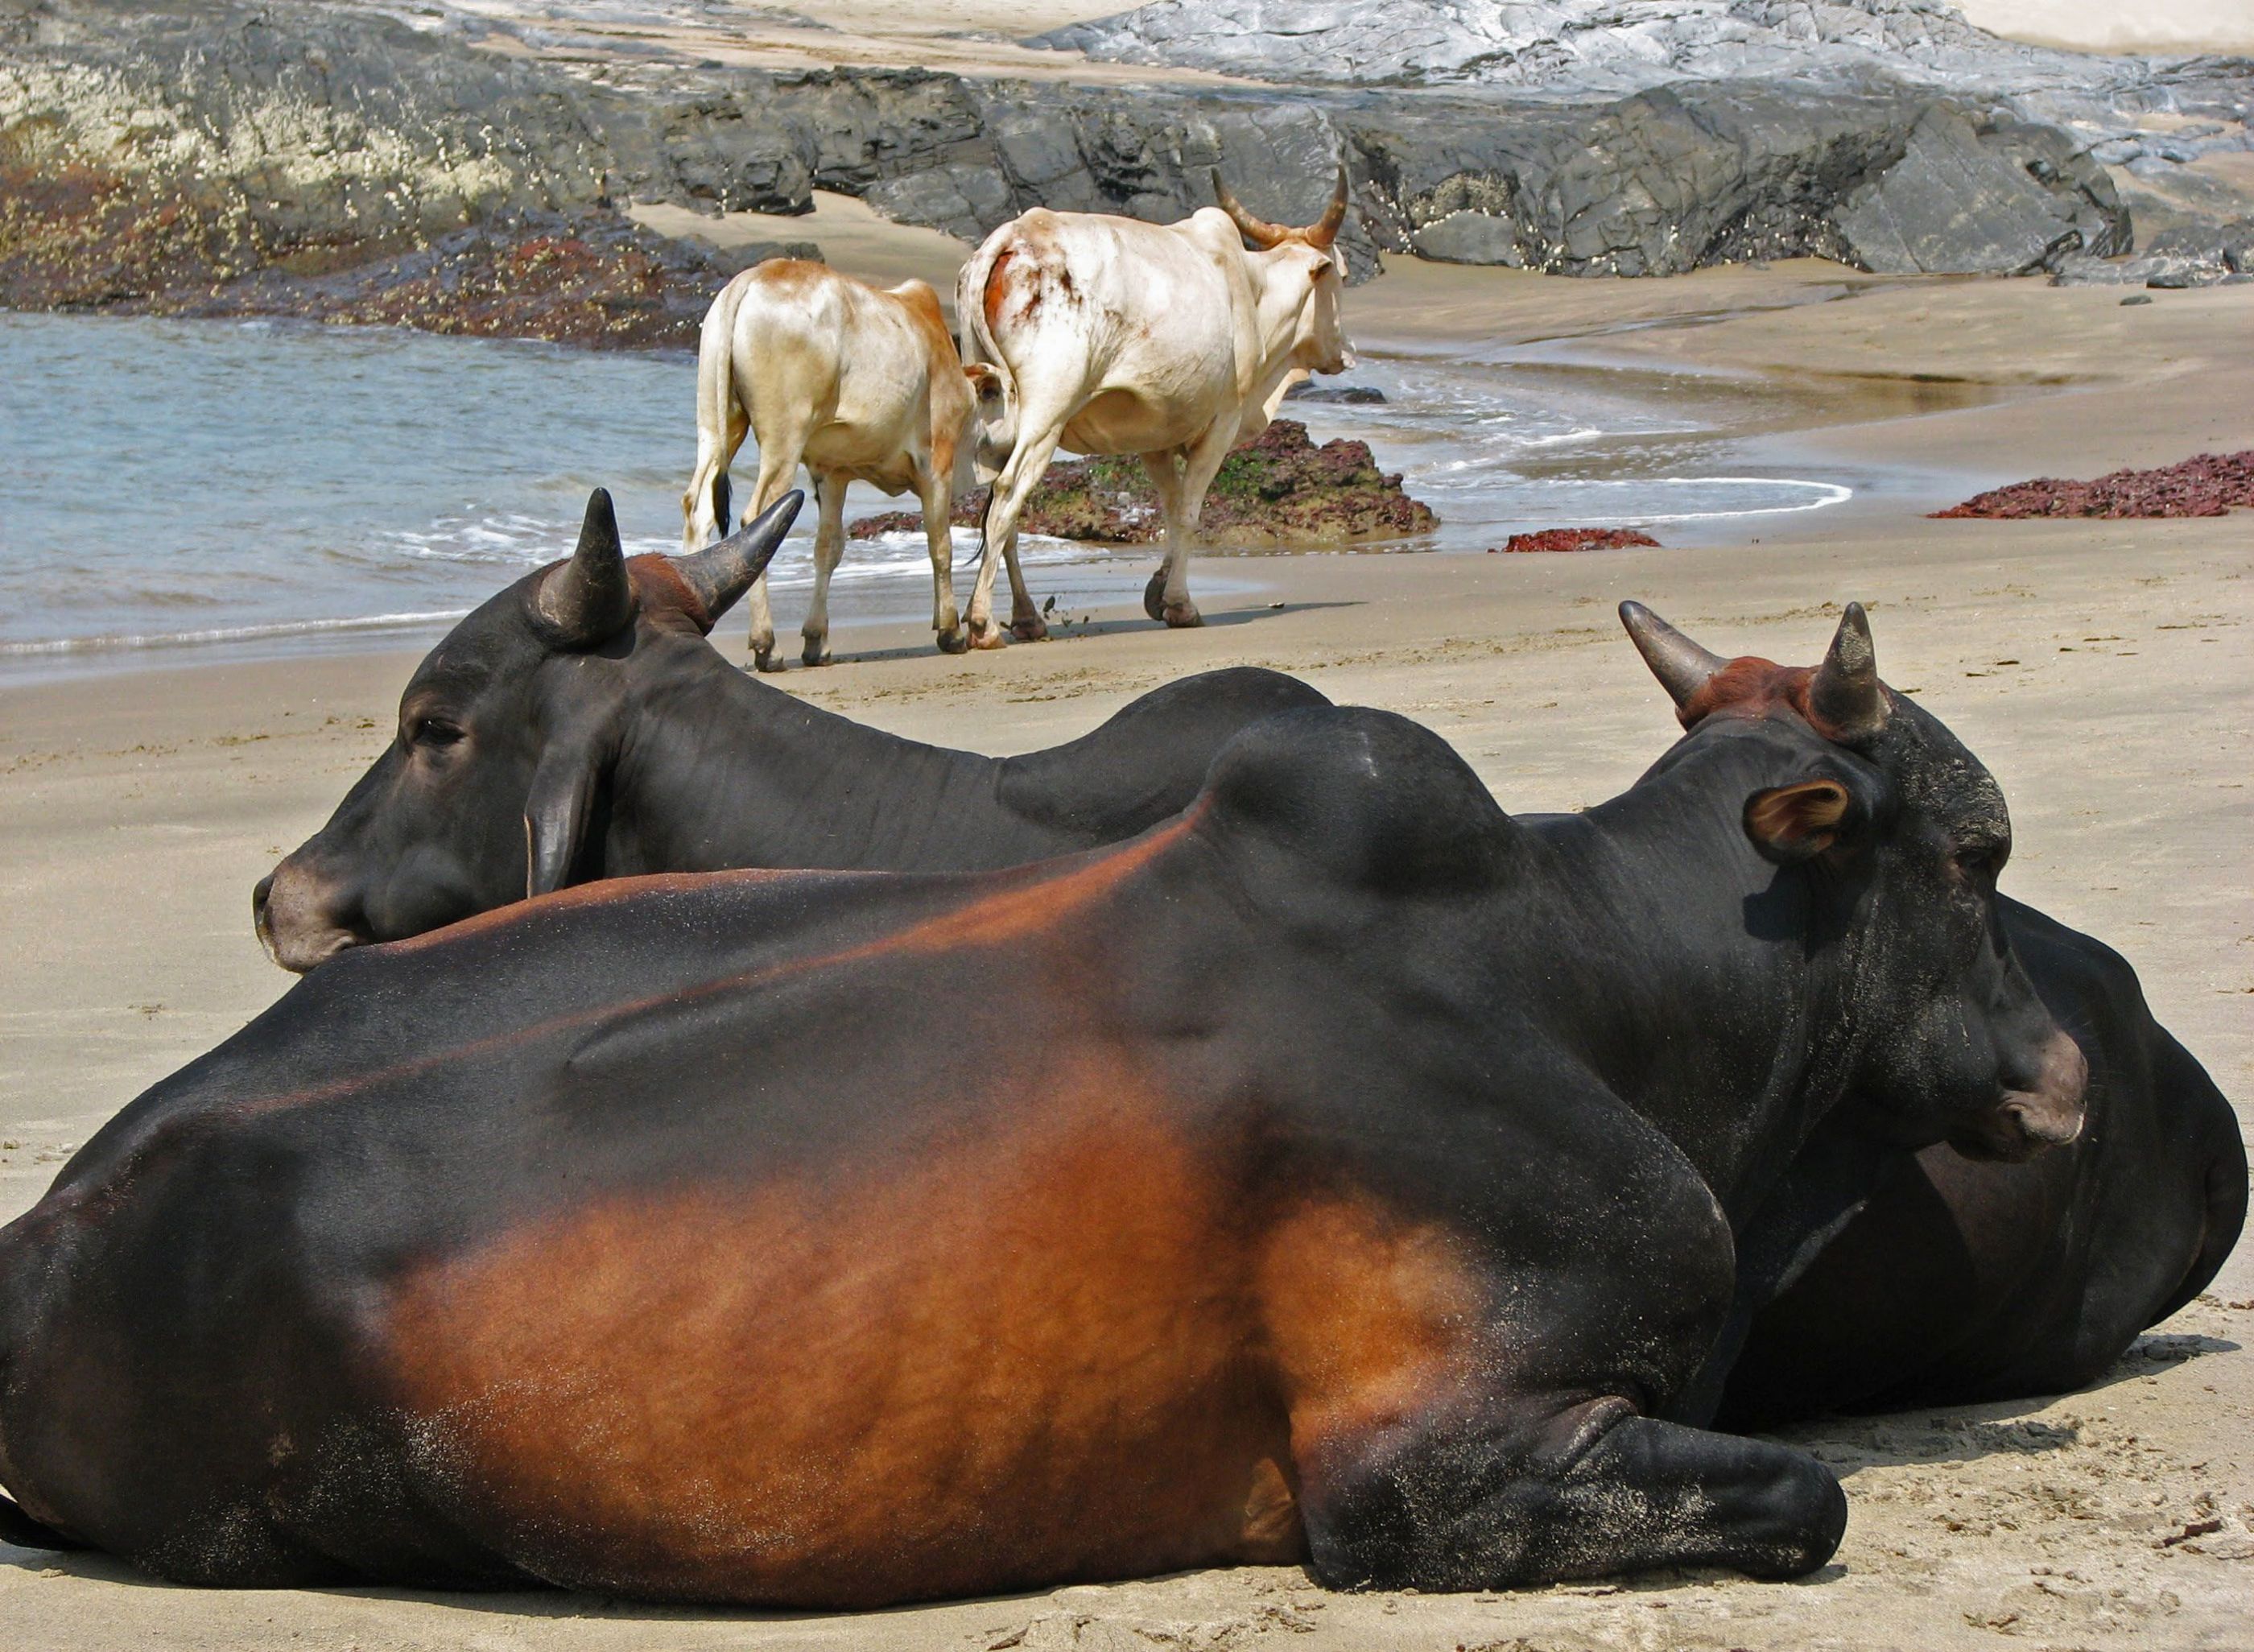 cows at the beach in Goa, India